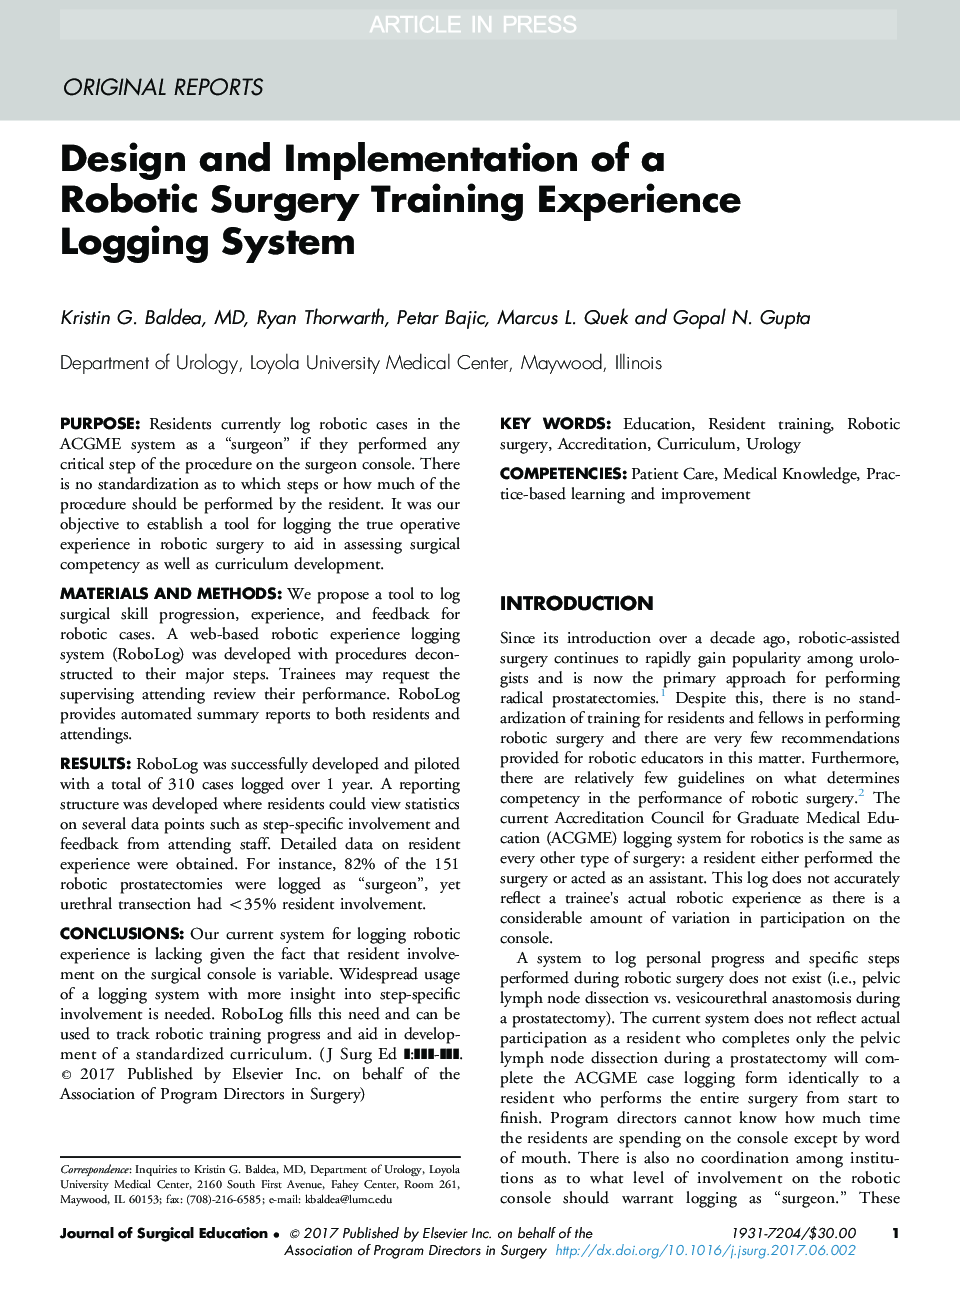 Design and Implementation of a Robotic Surgery Training Experience Logging System